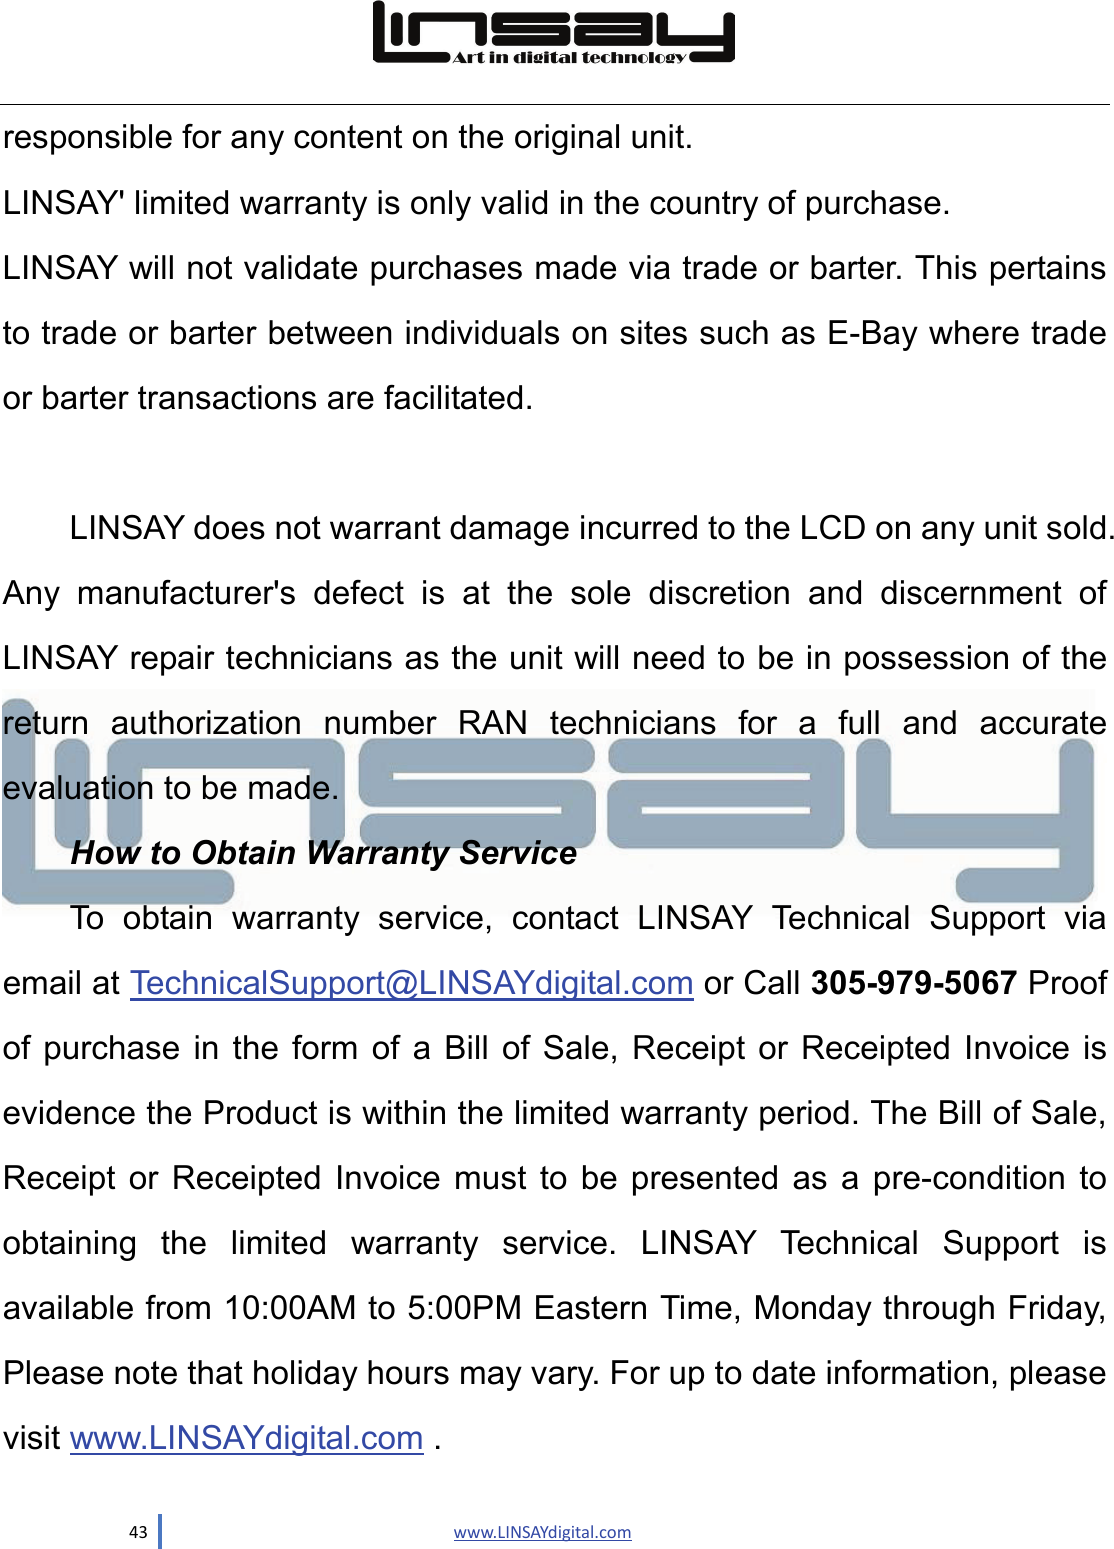  43                               www.LINSAYdigital.com  responsible for any content on the original unit. LINSAY&apos; limited warranty is only valid in the country of purchase. LINSAY will not validate purchases made via trade or barter. This pertains to trade or barter between individuals on sites such as E-Bay where trade or barter transactions are facilitated.  LINSAY does not warrant damage incurred to the LCD on any unit sold. Any manufacturer&apos;s defect is at the sole discretion and discernment of LINSAY repair technicians as the unit will need to be in possession of the return authorization number RAN technicians for a full and accurate evaluation to be made. How to Obtain Warranty Service To obtain warranty service, contact LINSAY Technical Support via email at TechnicalSupport@LINSAYdigital.com or Call 305-979-5067 Proof of purchase in the form of a Bill of Sale, Receipt or Receipted Invoice is evidence the Product is within the limited warranty period. The Bill of Sale, Receipt or Receipted Invoice must to be presented as a pre-condition to obtaining the limited warranty service. LINSAY Technical Support is available from 10:00AM to 5:00PM Eastern Time, Monday through Friday, Please note that holiday hours may vary. For up to date information, please visit www.LINSAYdigital.com . 